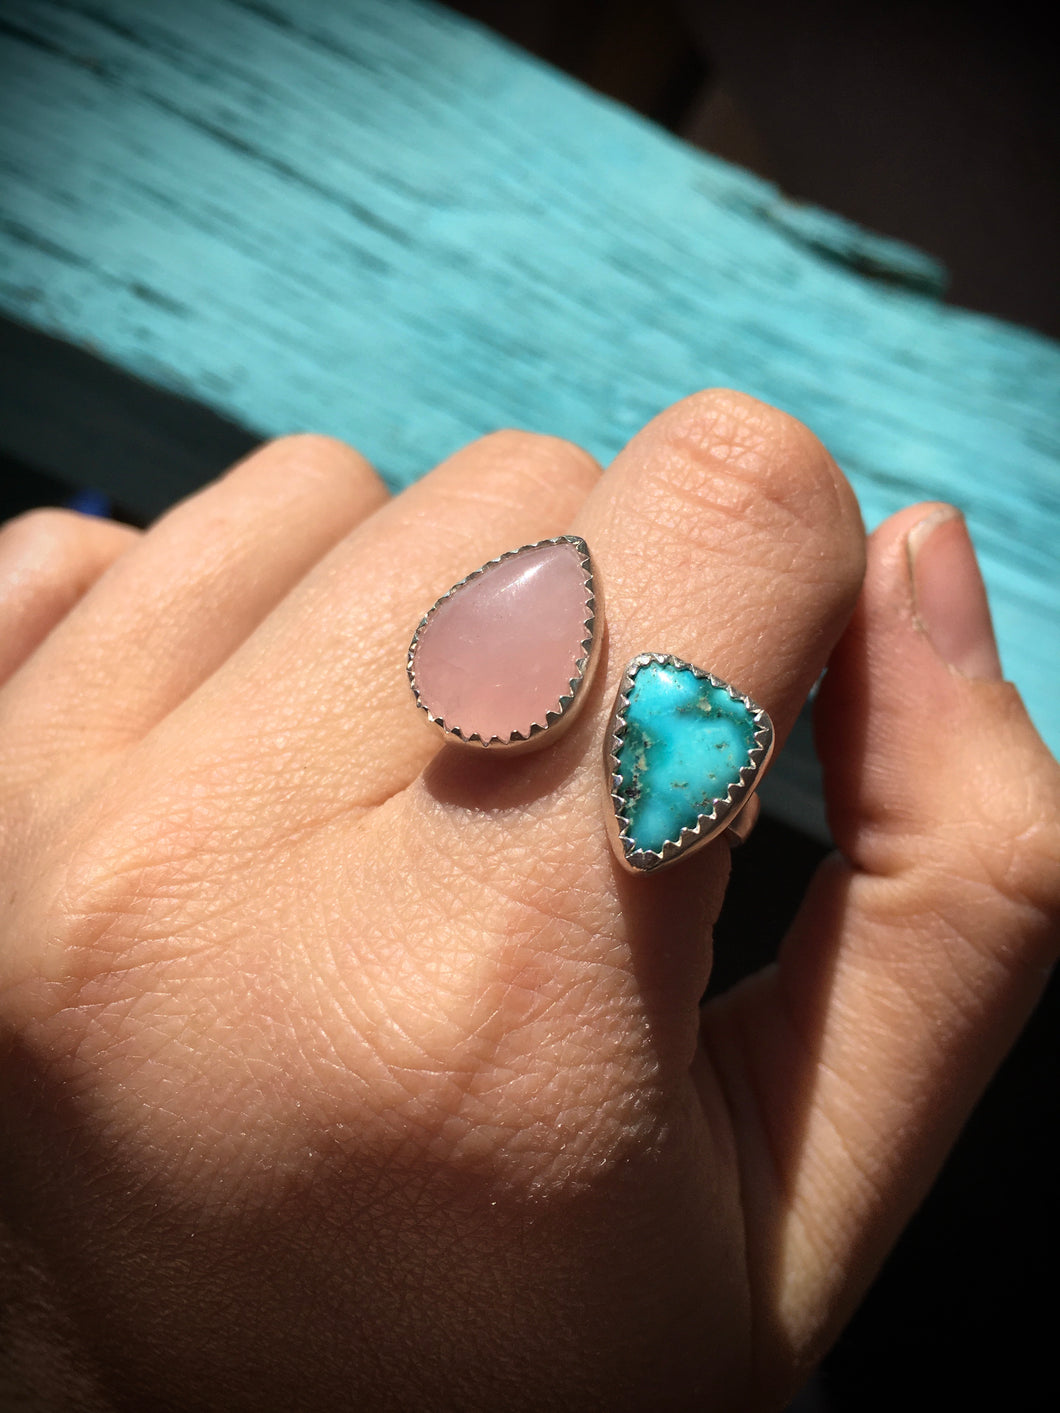 Rose quartz and White Water turquoise double ring - size 7-8